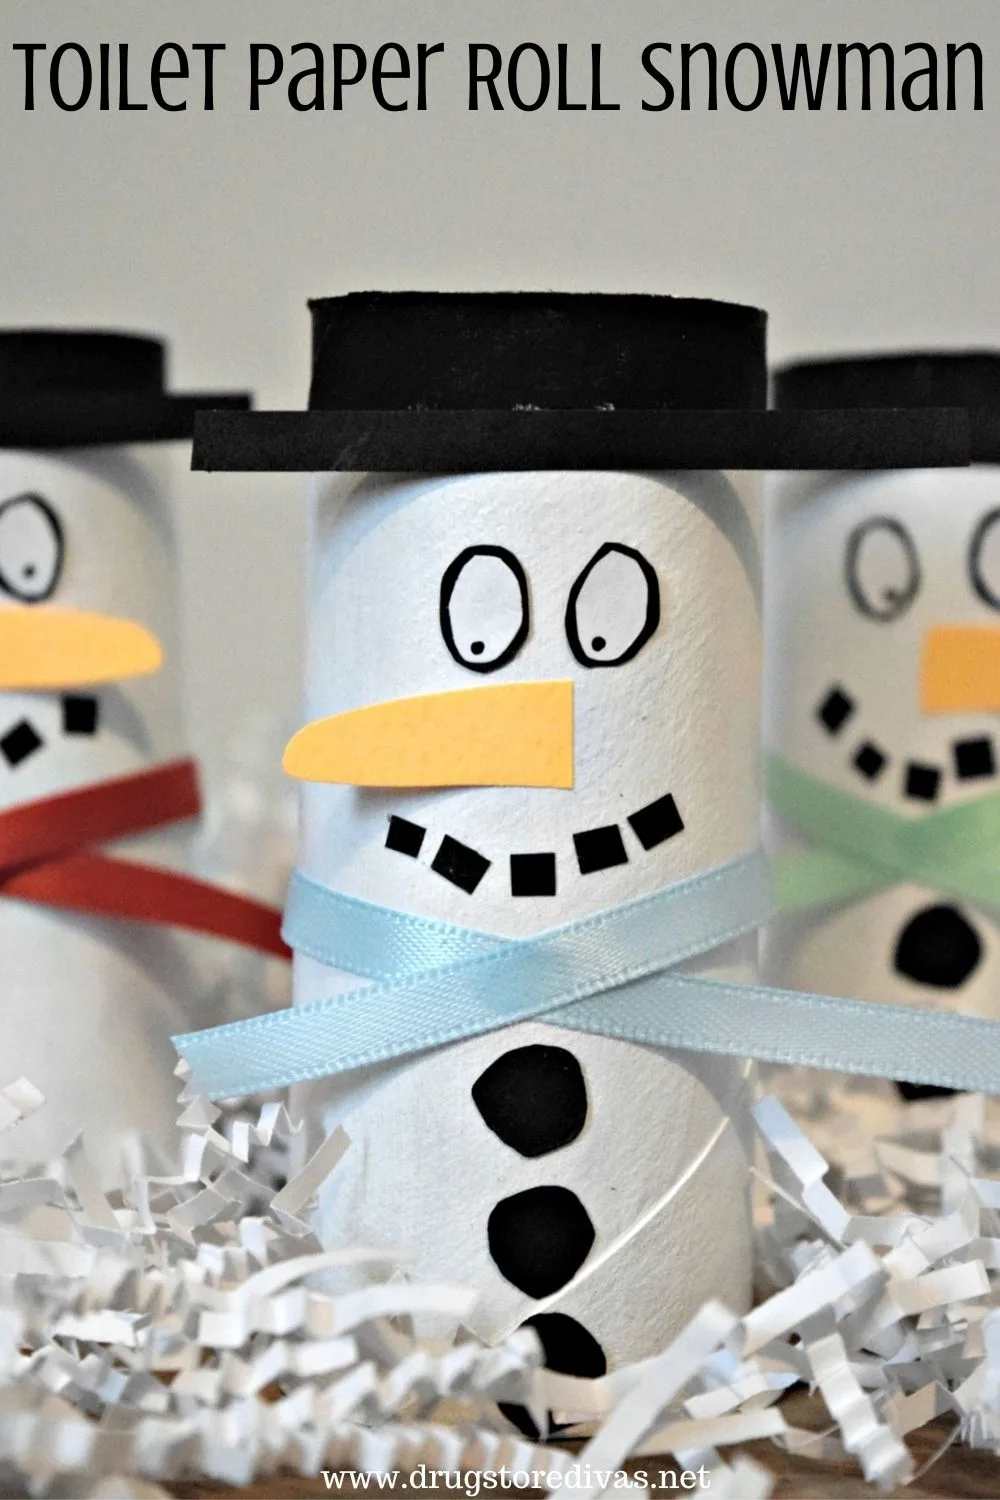 Three snowmen made from cardboard tubes in white paper shred with the words 